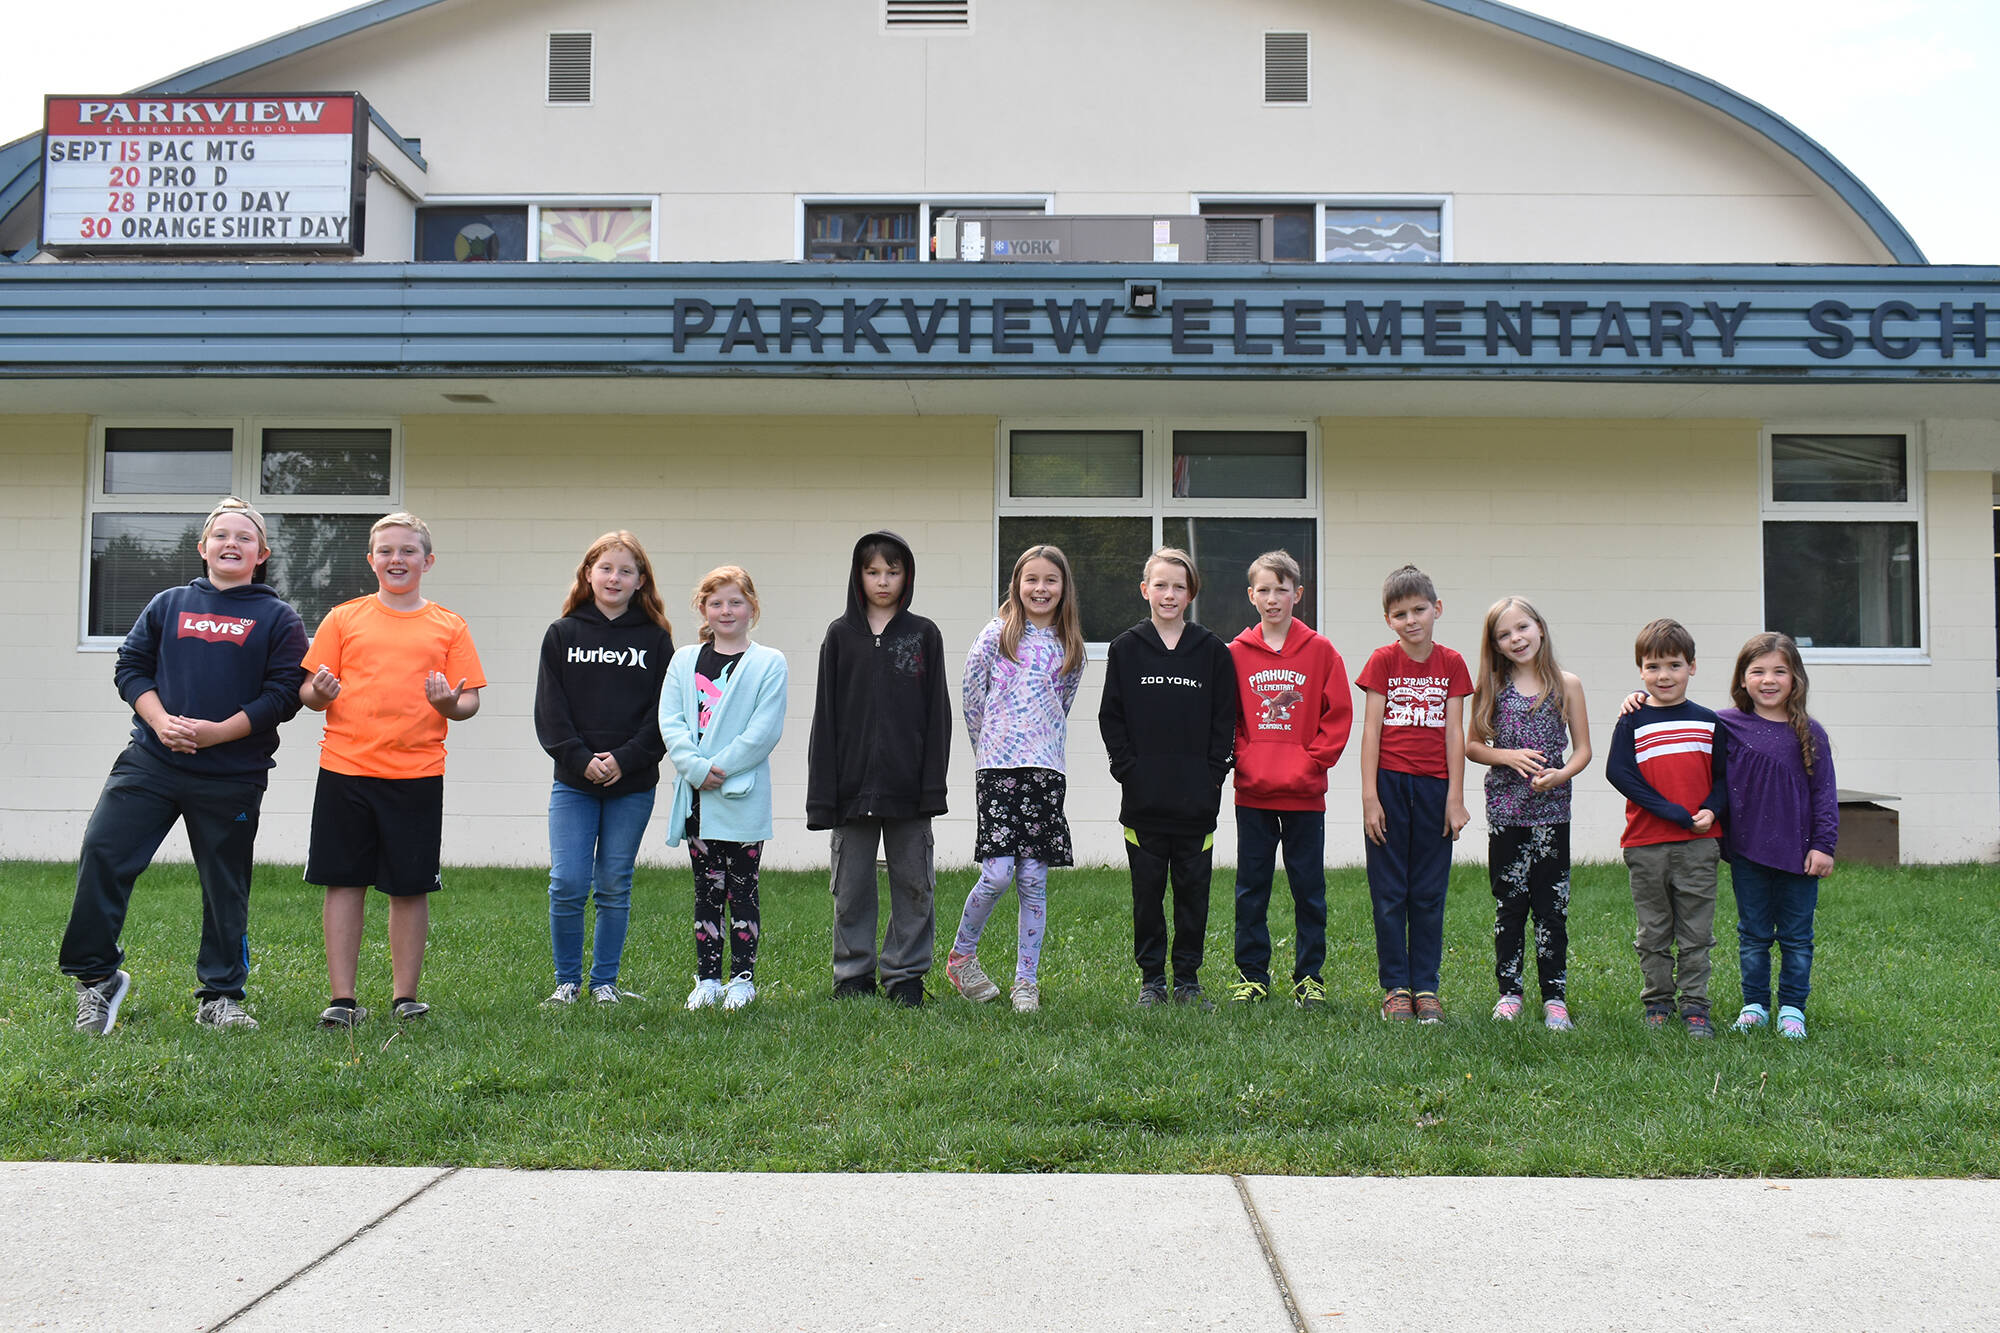 Six sets of twins are attending Parkview Elementary School in Sicamous for the 2021-22 school year. From left to right, their names are: Levi and Cody Clark, Kate and Reese Osmundson, Maxx and Maycie-Jean Lane, Dustin and Dillon Hilder, Emily and Nathan Presley, and Aurora and Logan Dawson. (Zachary Roman/Eagle Valley News)